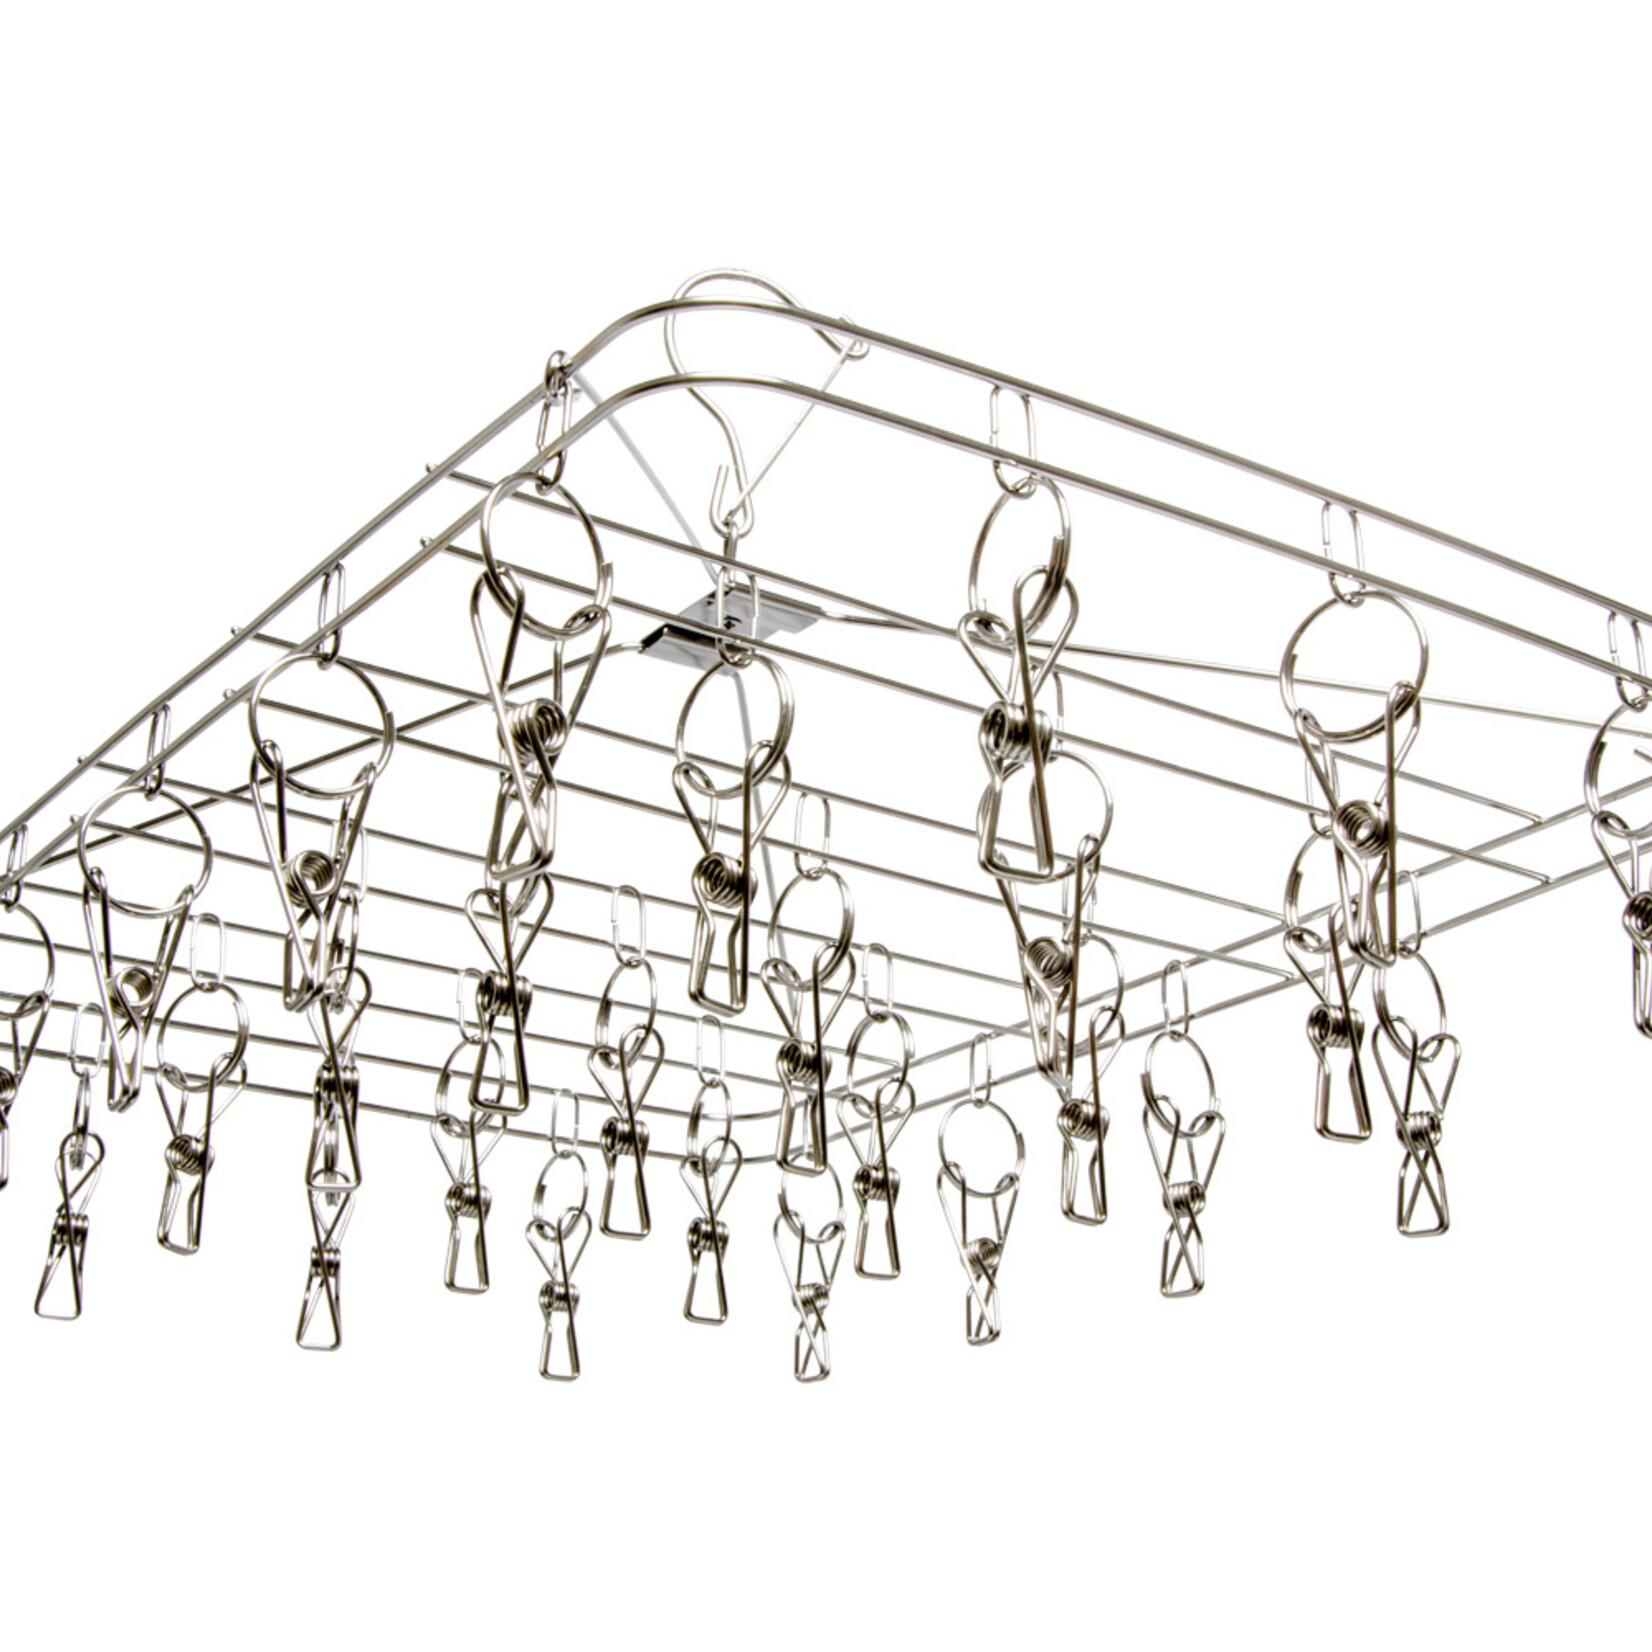 Hydrofarm STACK!T 28 Clip Stainless Steel Drying Rack